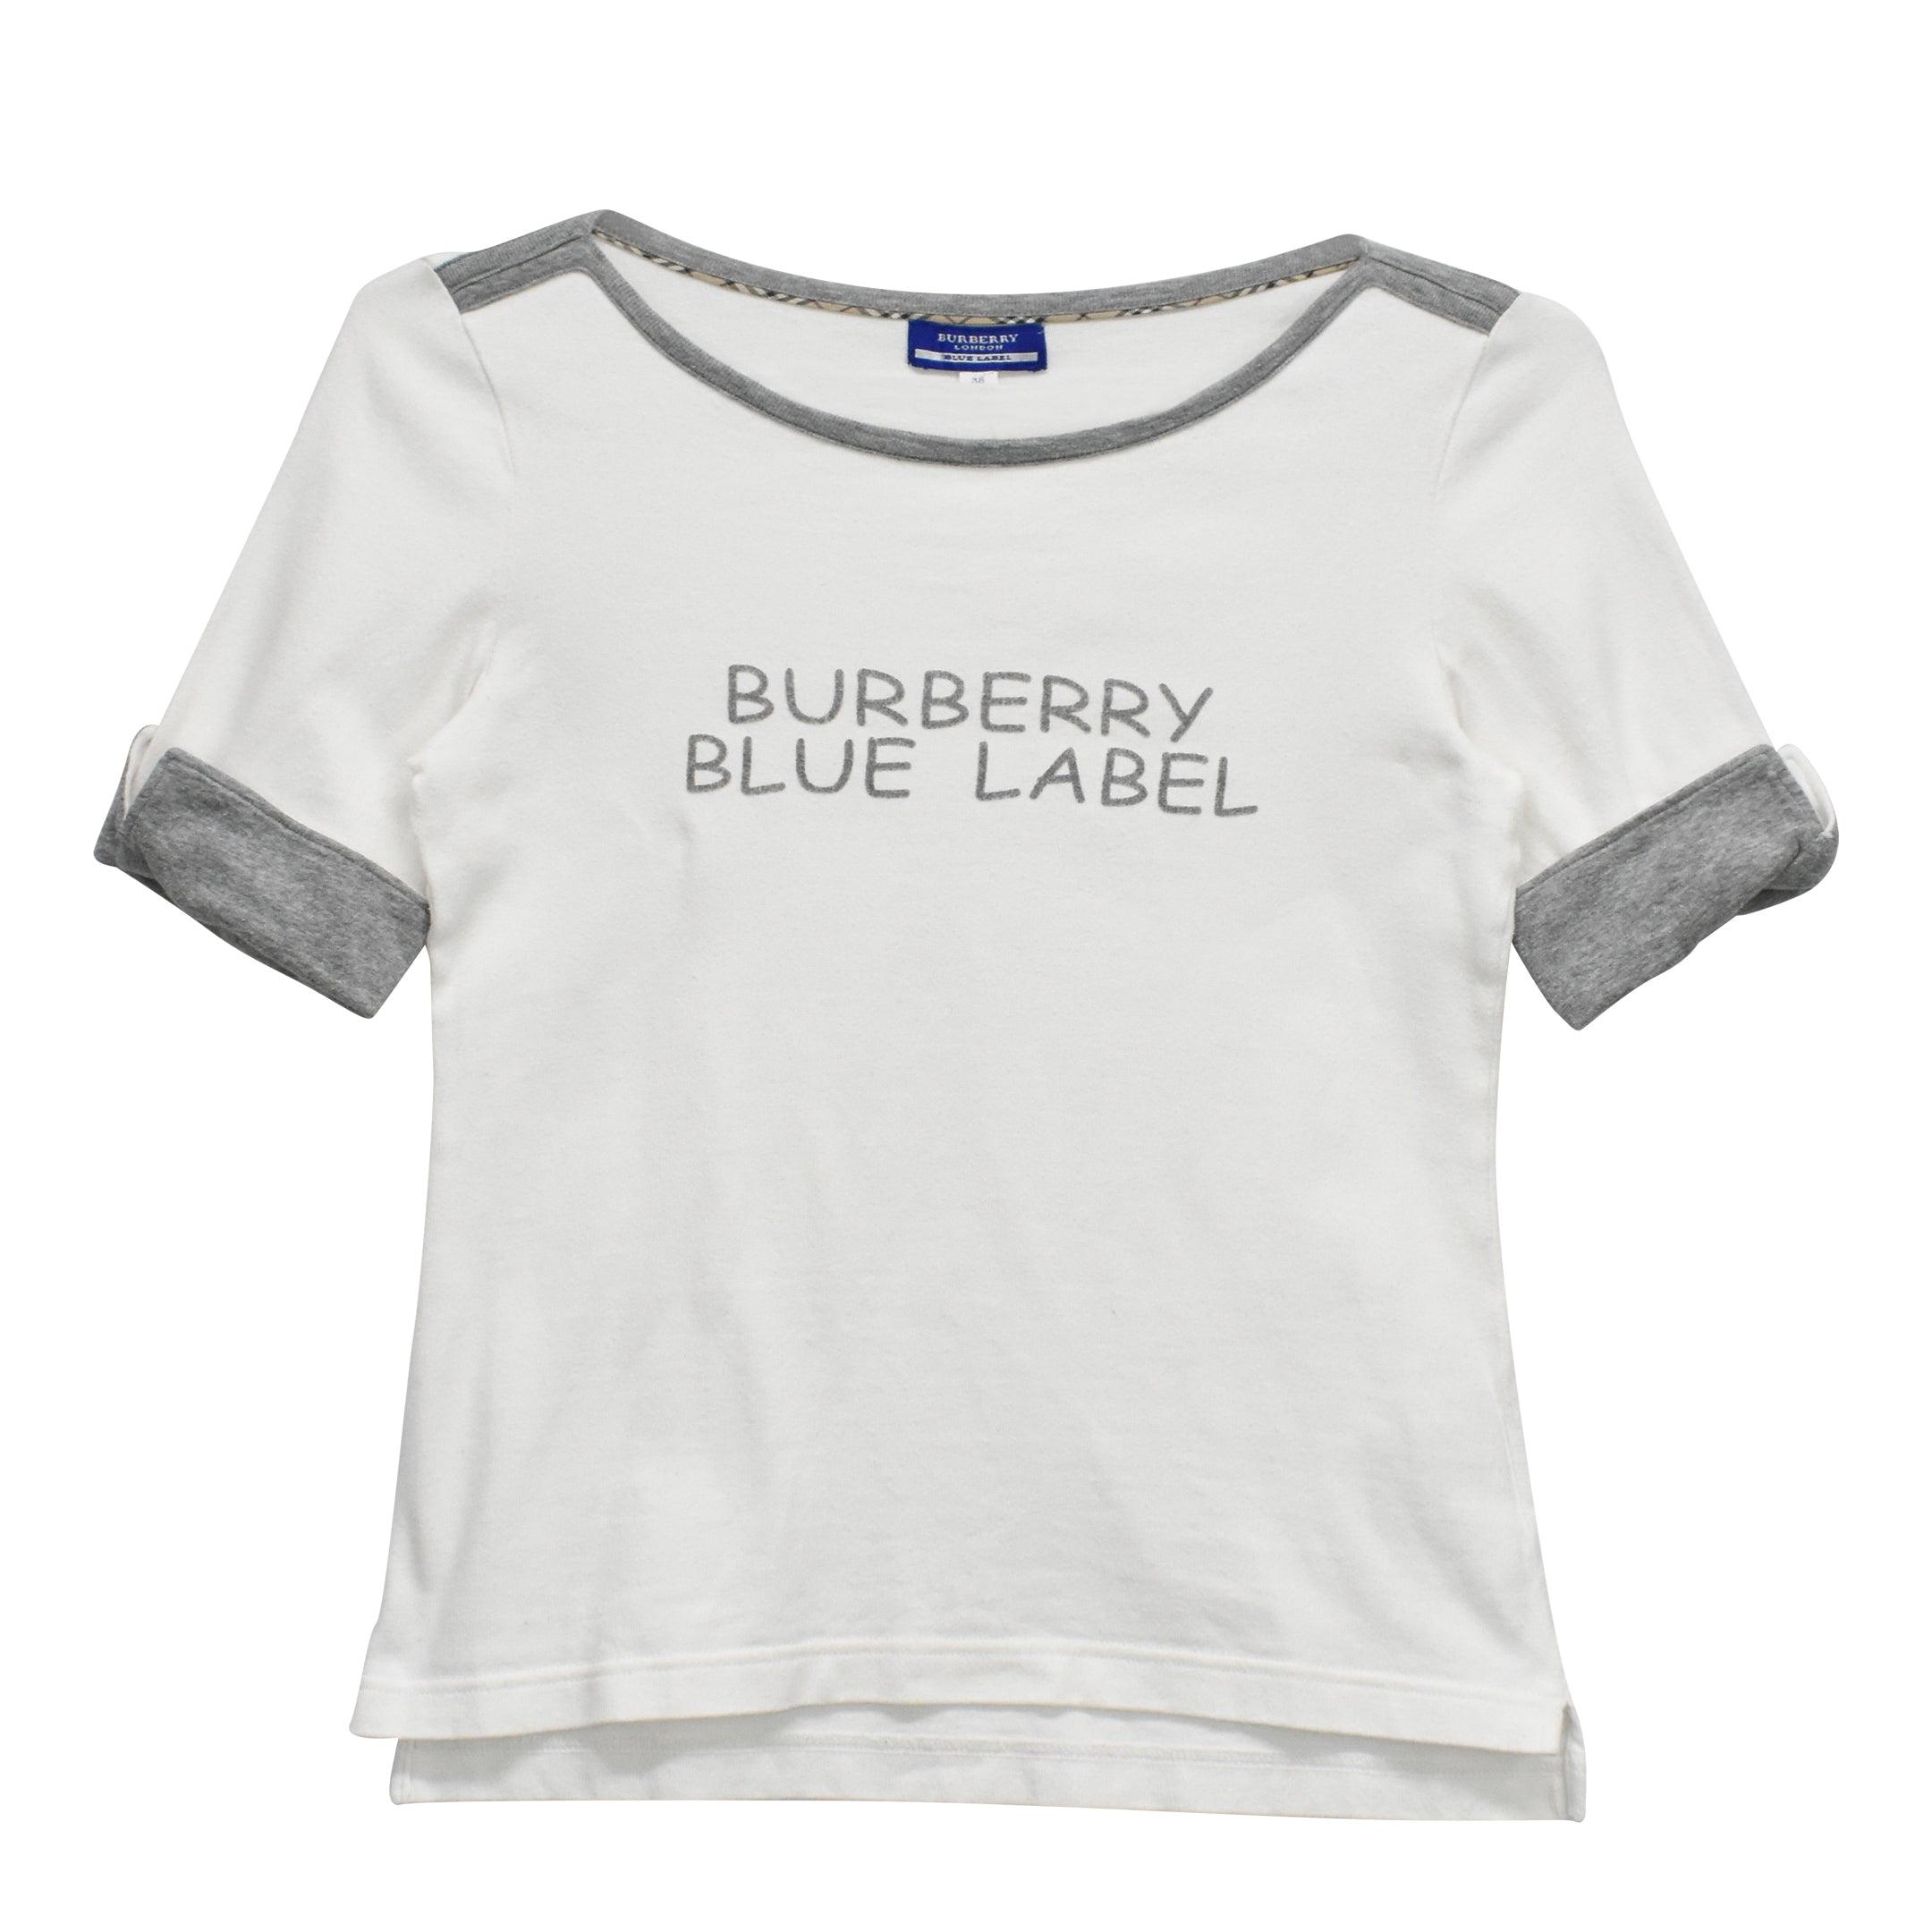 Burberry Blue Label T-Shirt - Women's 38 - Fashionably Yours